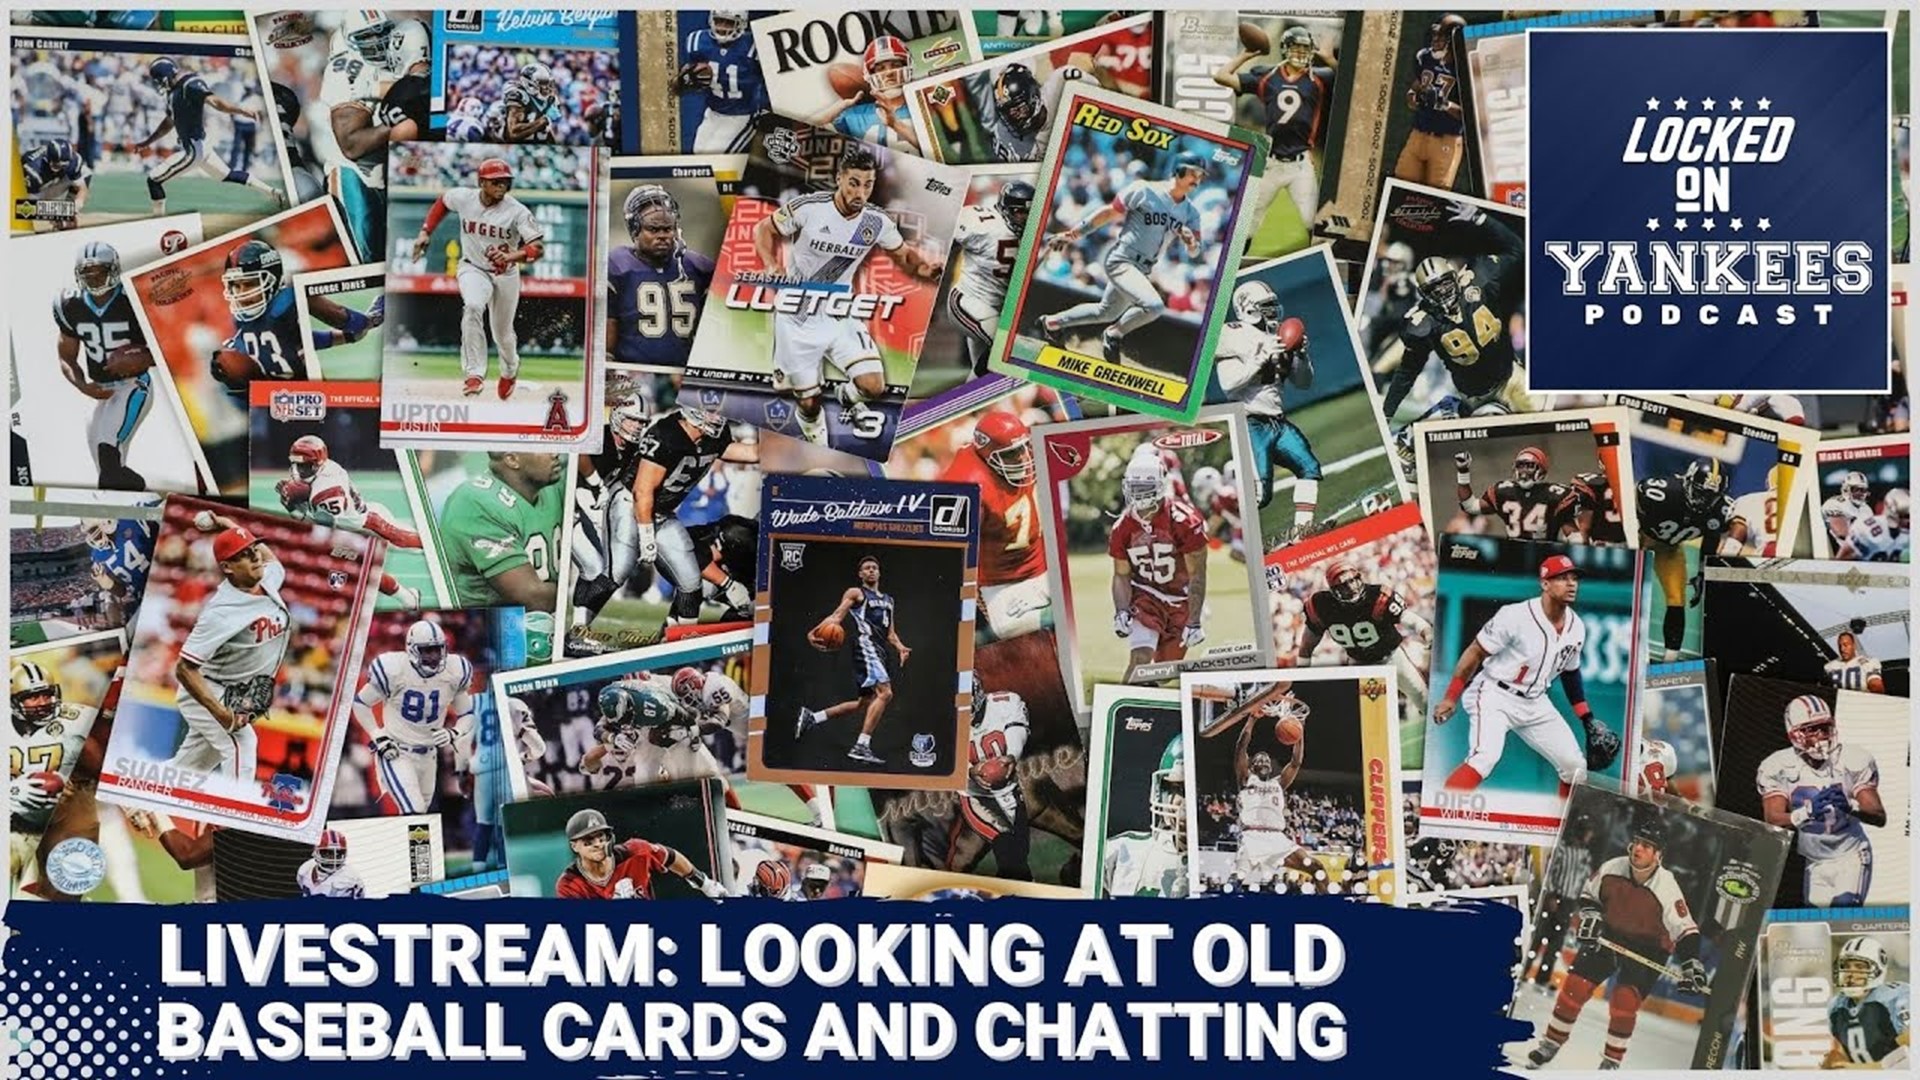 Host Stacey Gotsulias will be looking at a bunch of baseball cards that she received in the mail from a friend.